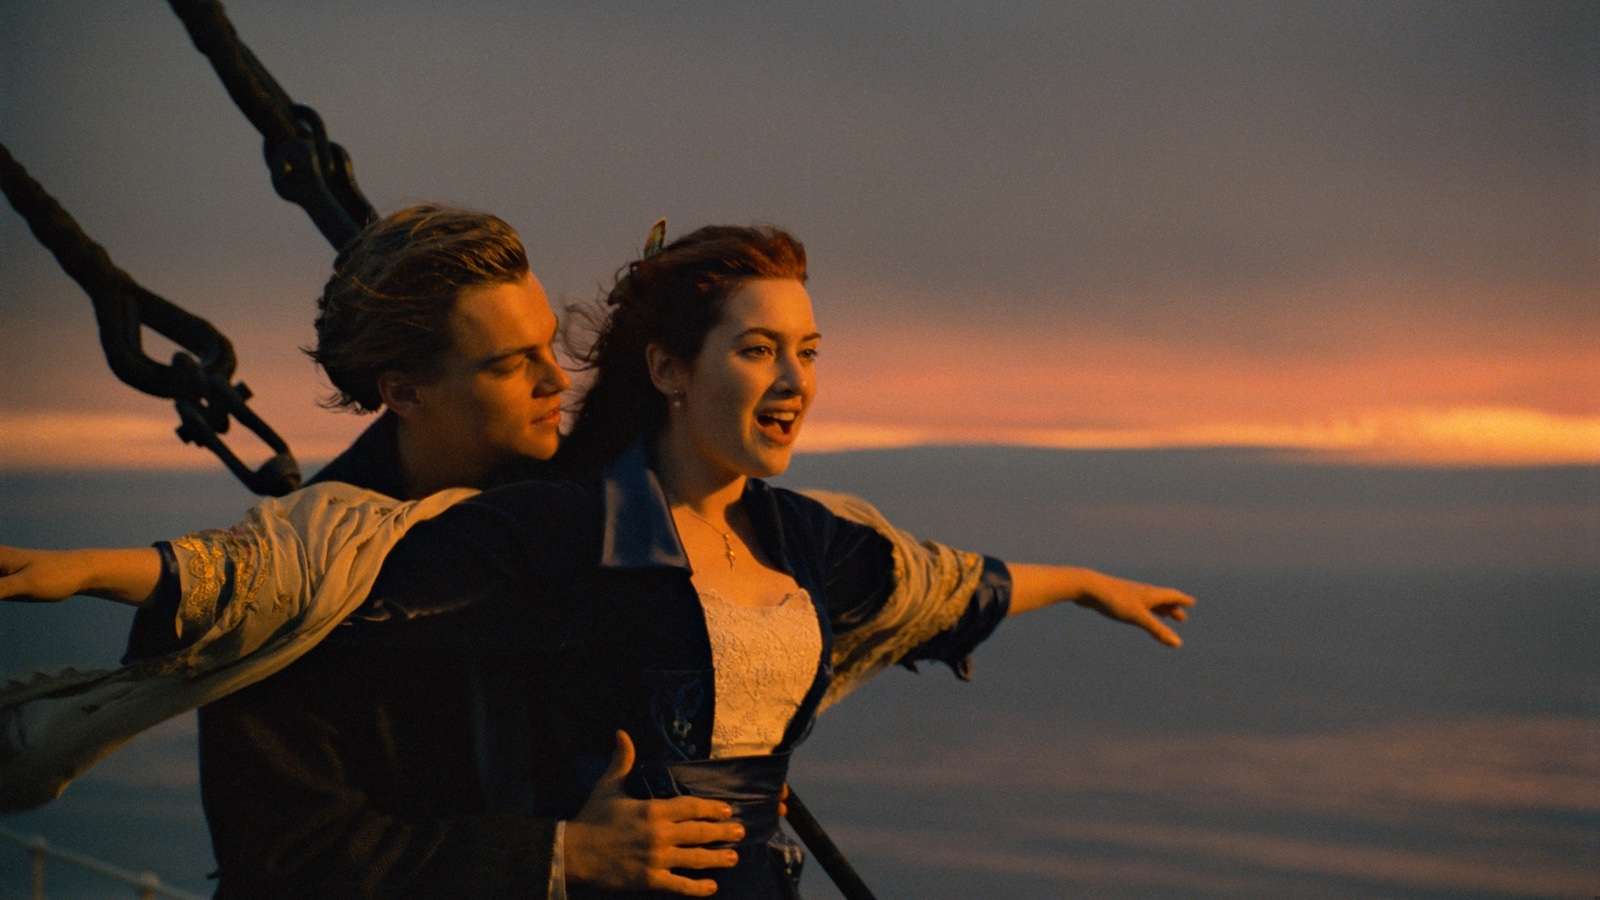 Leonardo DiCaprio and Kate Winslet as Jack and Rose in Titanic